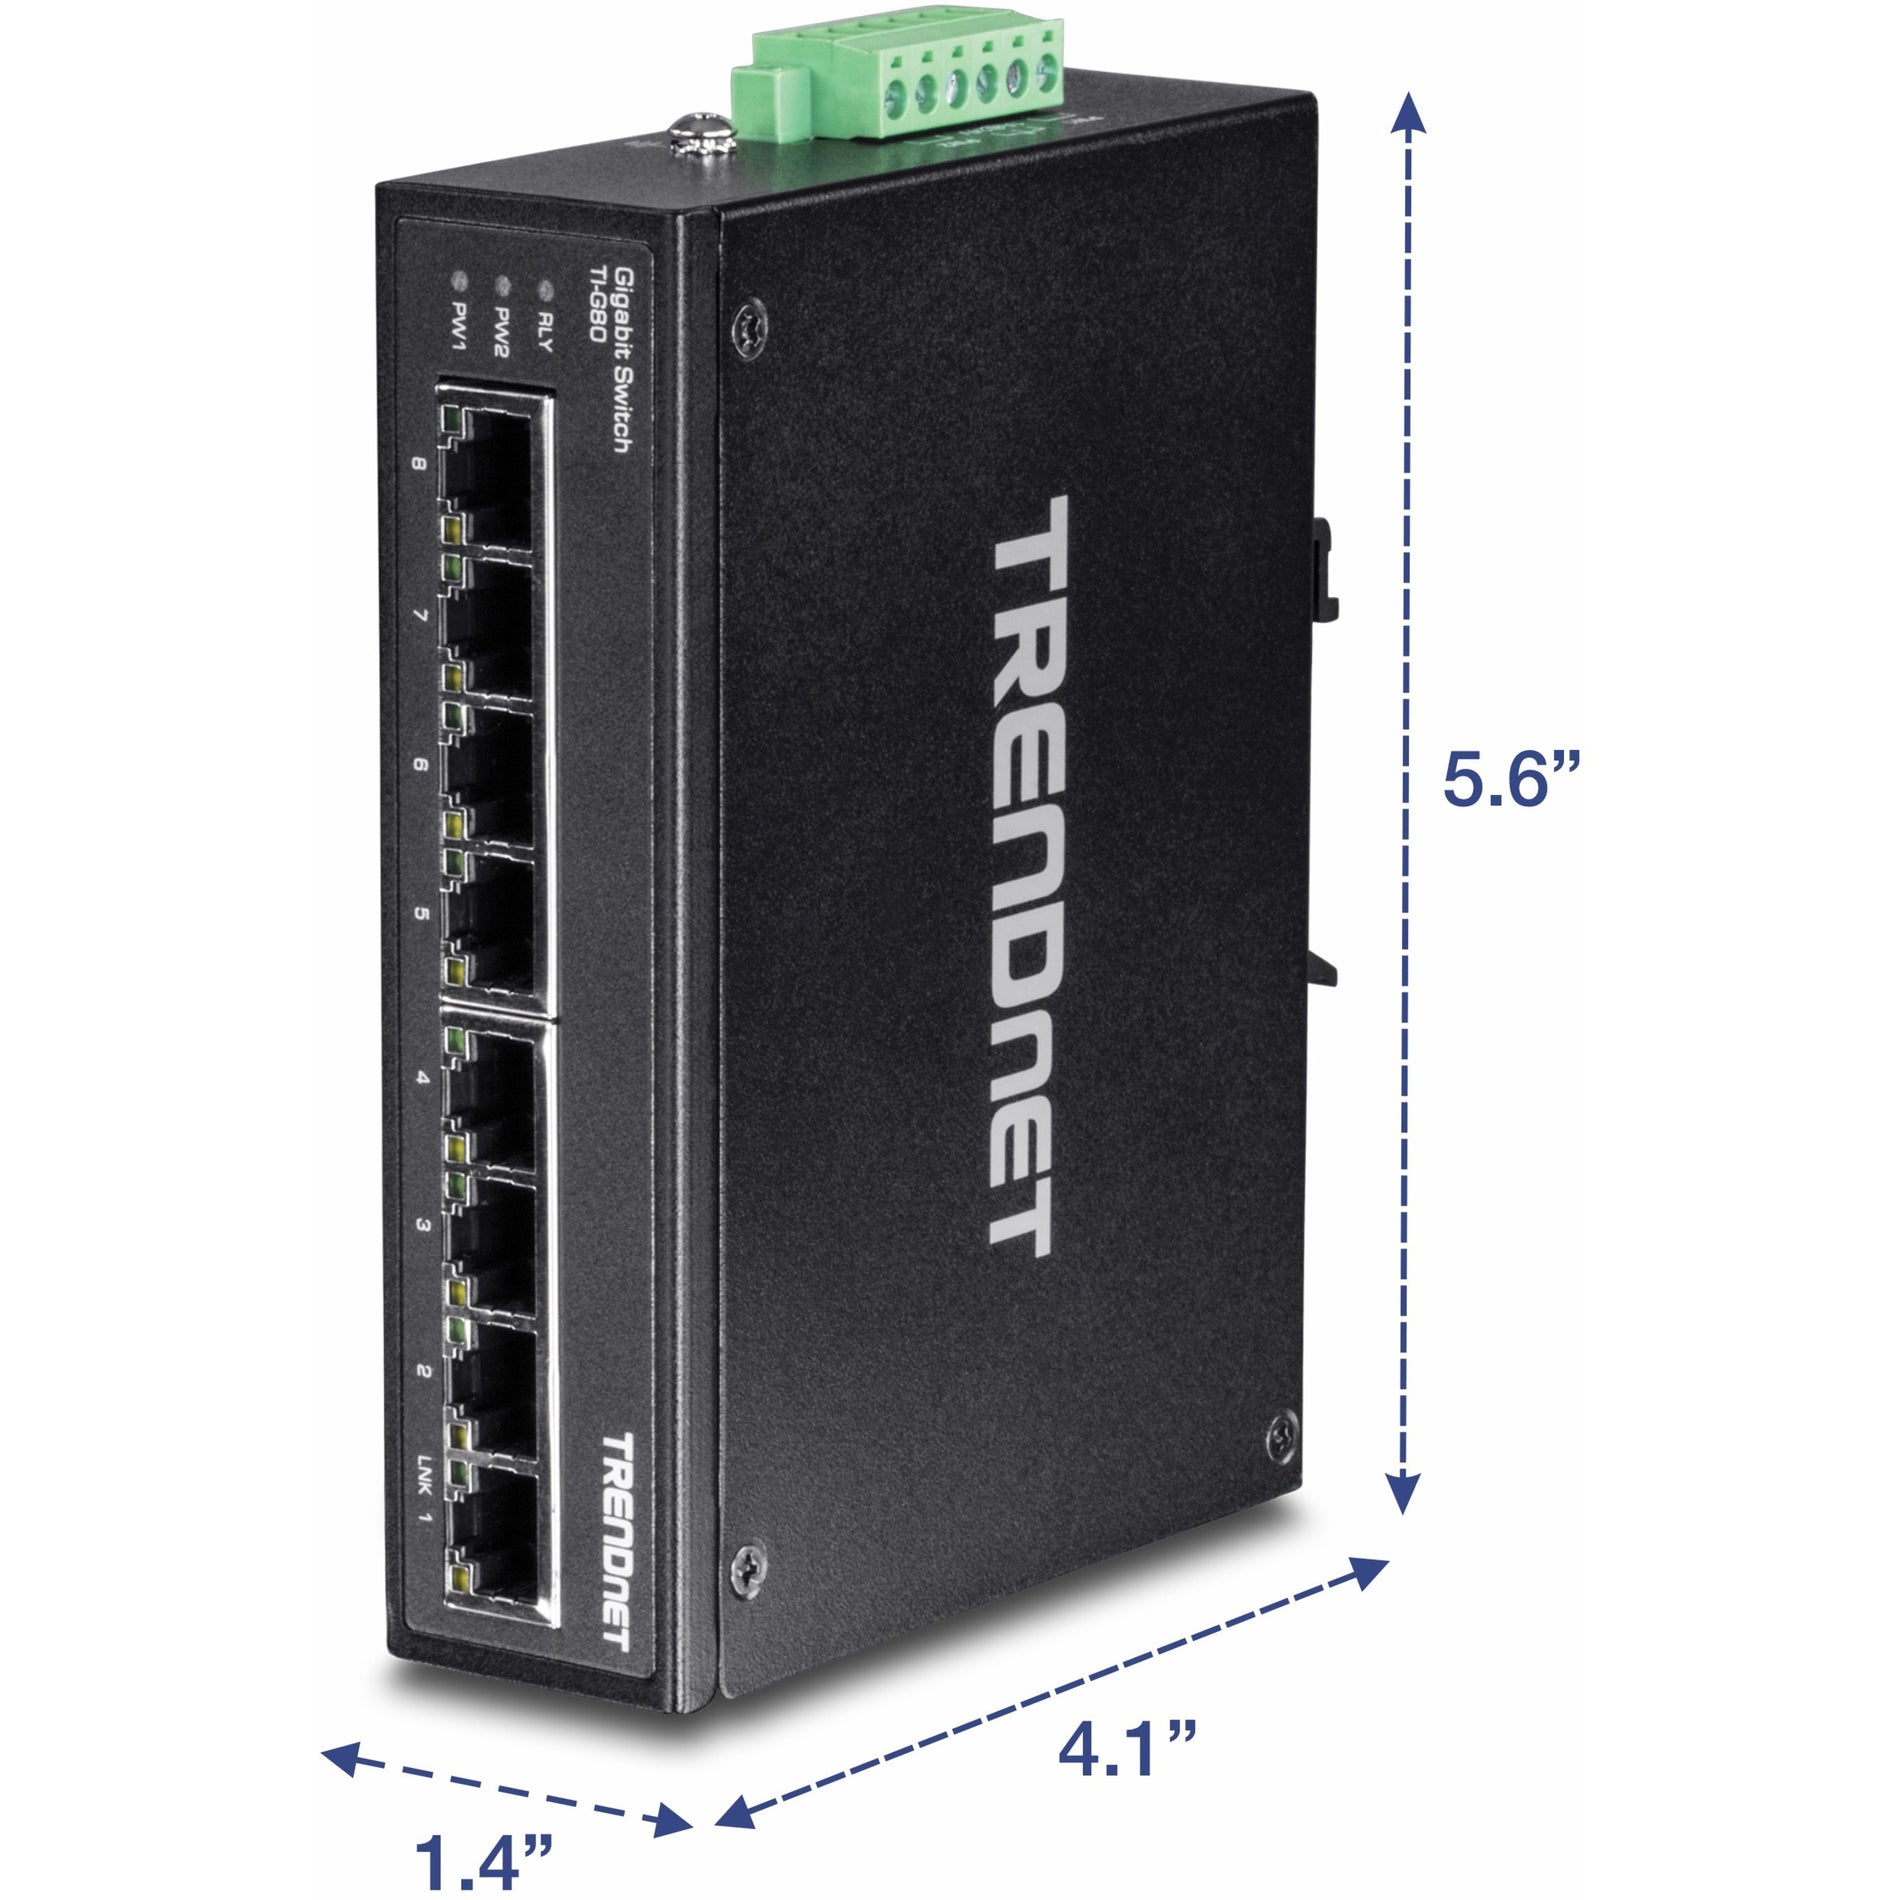 TRENDnet TI-G80 8-port Hardened Industrial Gigabit Switch, 16 Gbps Switching Capacity, IP30 Rated Metal Housing, Lifetime Protection